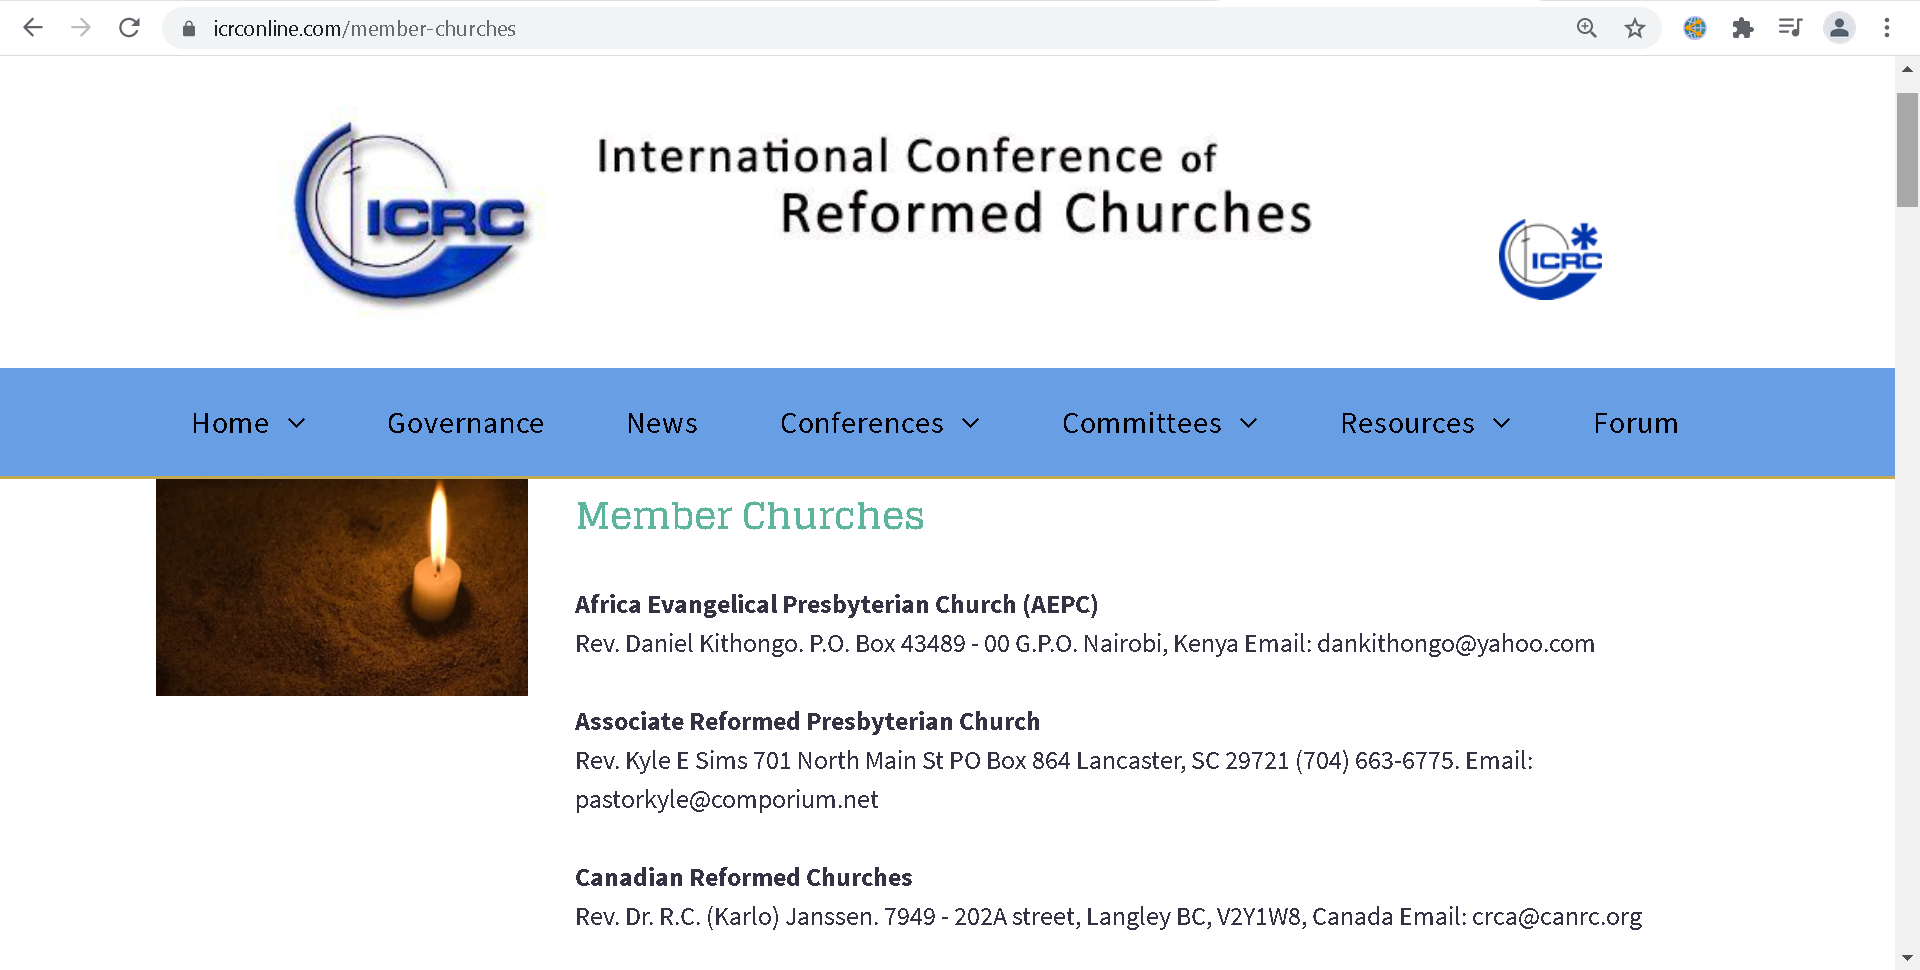 International Conference of Reformed Churches 2021